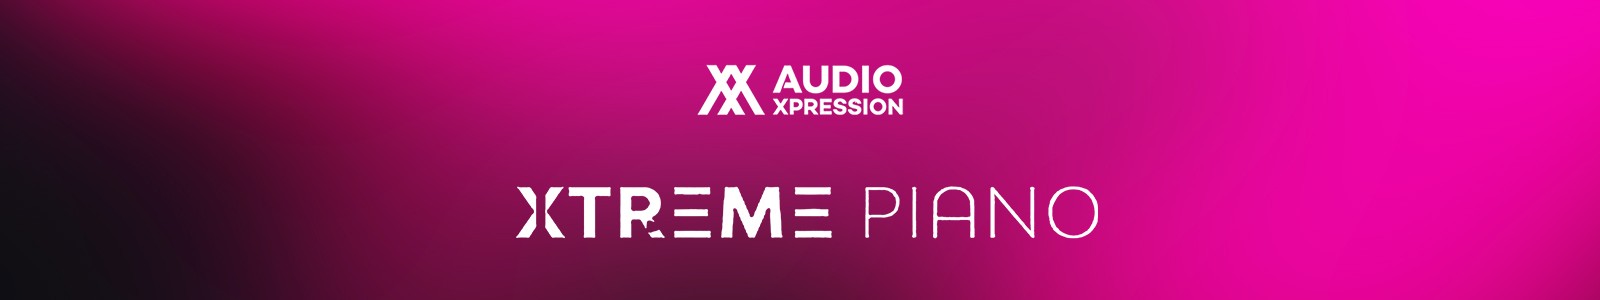 Xtreme Electric Piano by Audio Xpressions